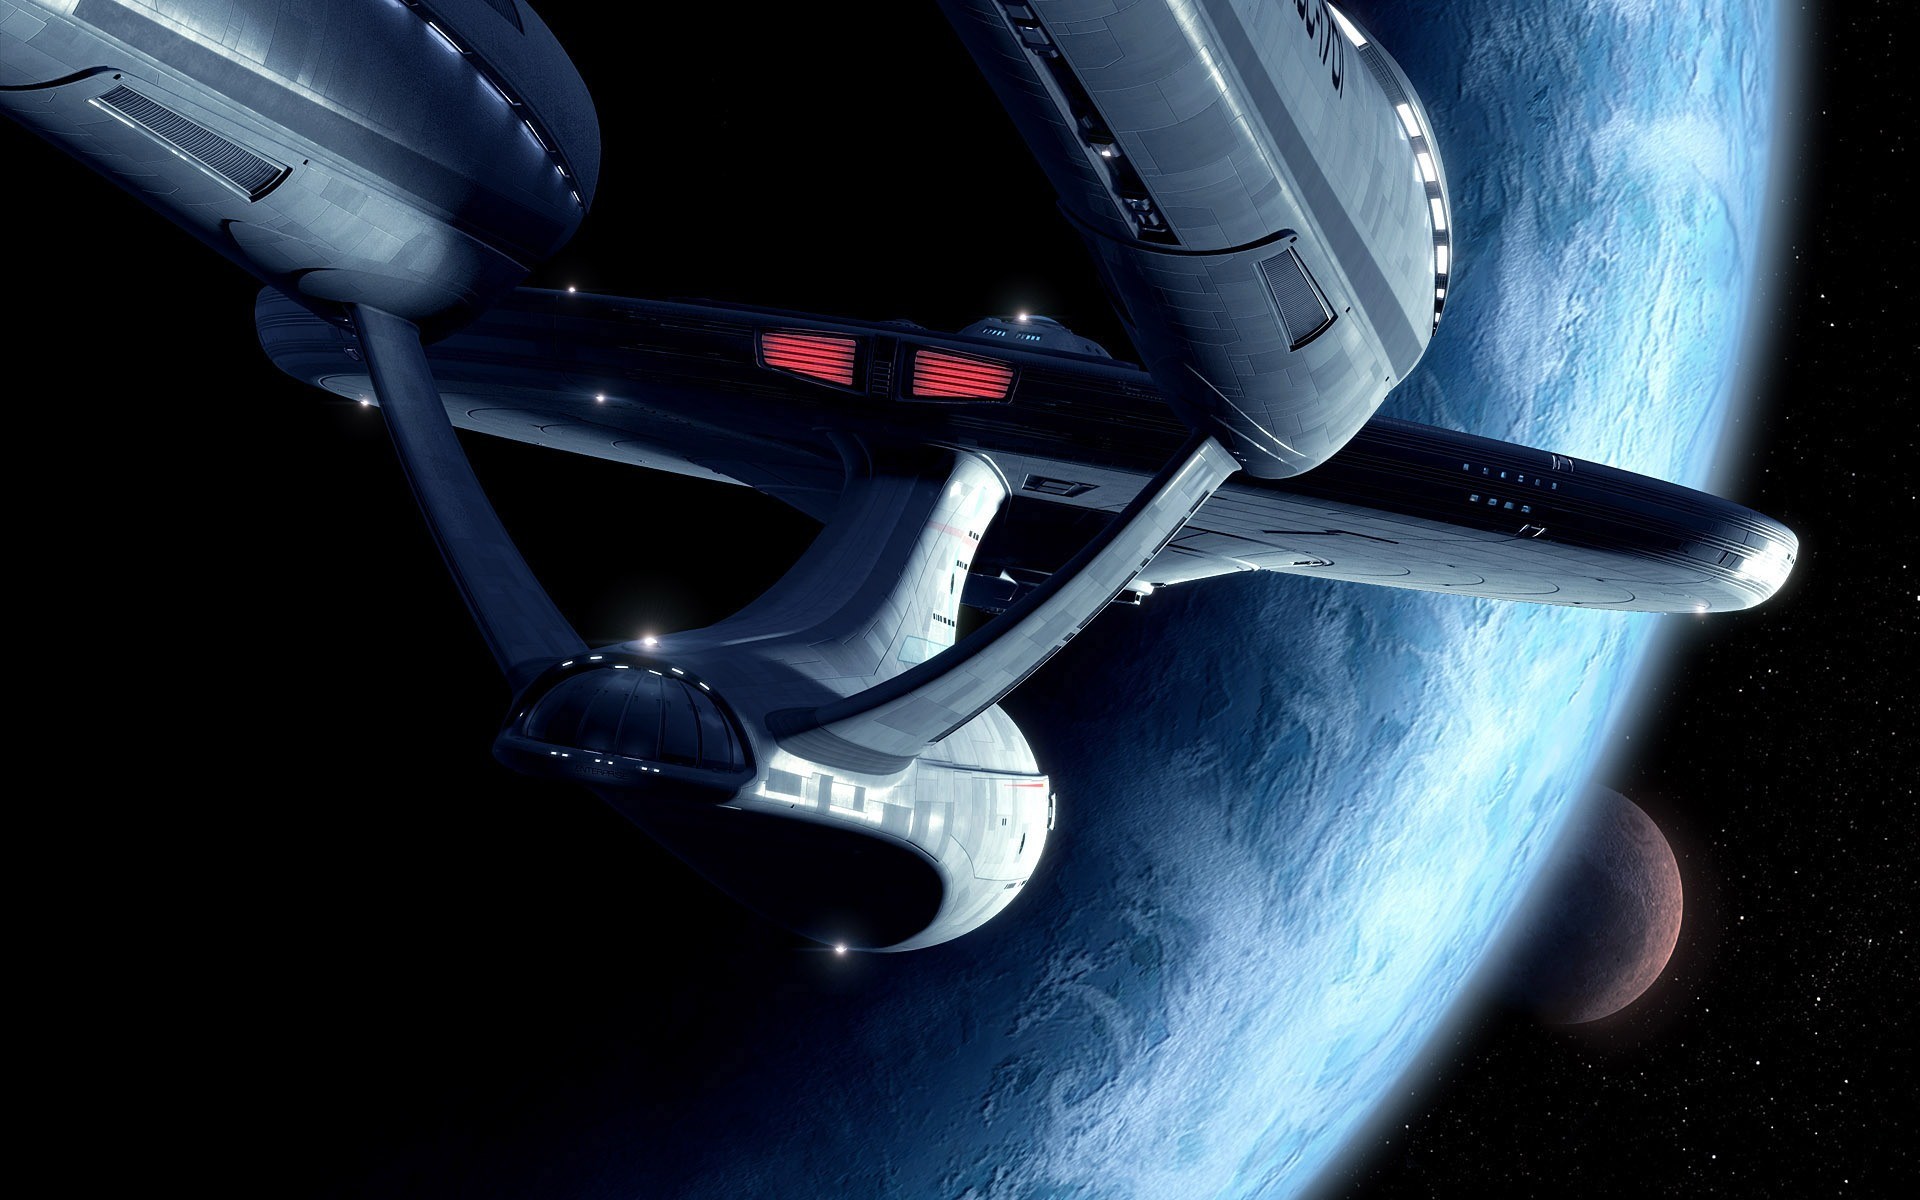 1920x1200 To see it in higher res. click HERE. â Tags: Trek 11